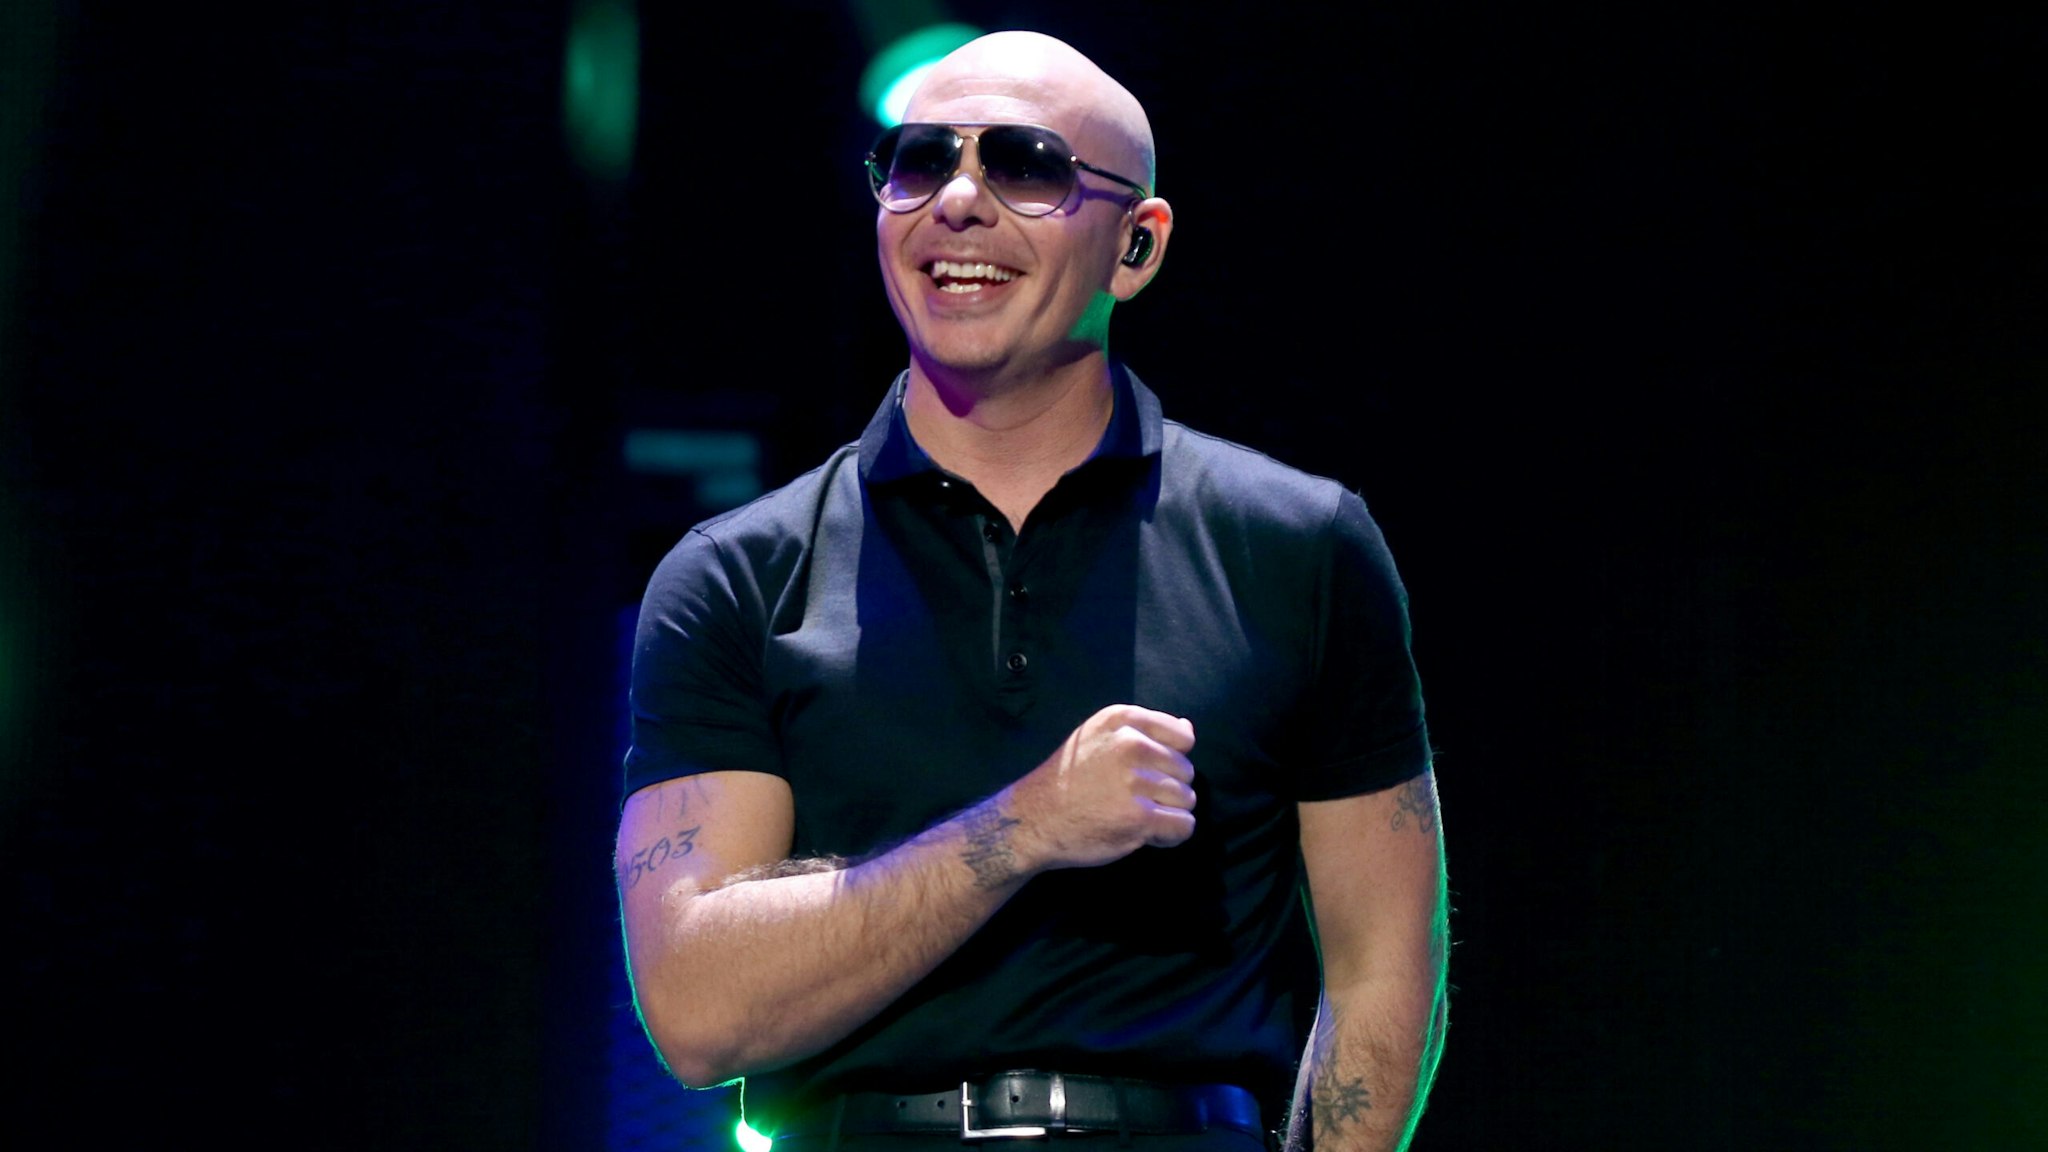 LAS VEGAS, NV - SEPTEMBER 24: Recording artist Pitbull performs onstage at the 2016 iHeartRadio Music Festival at T-Mobile Arena on September 24, 2016 in Las Vegas, Nevada.